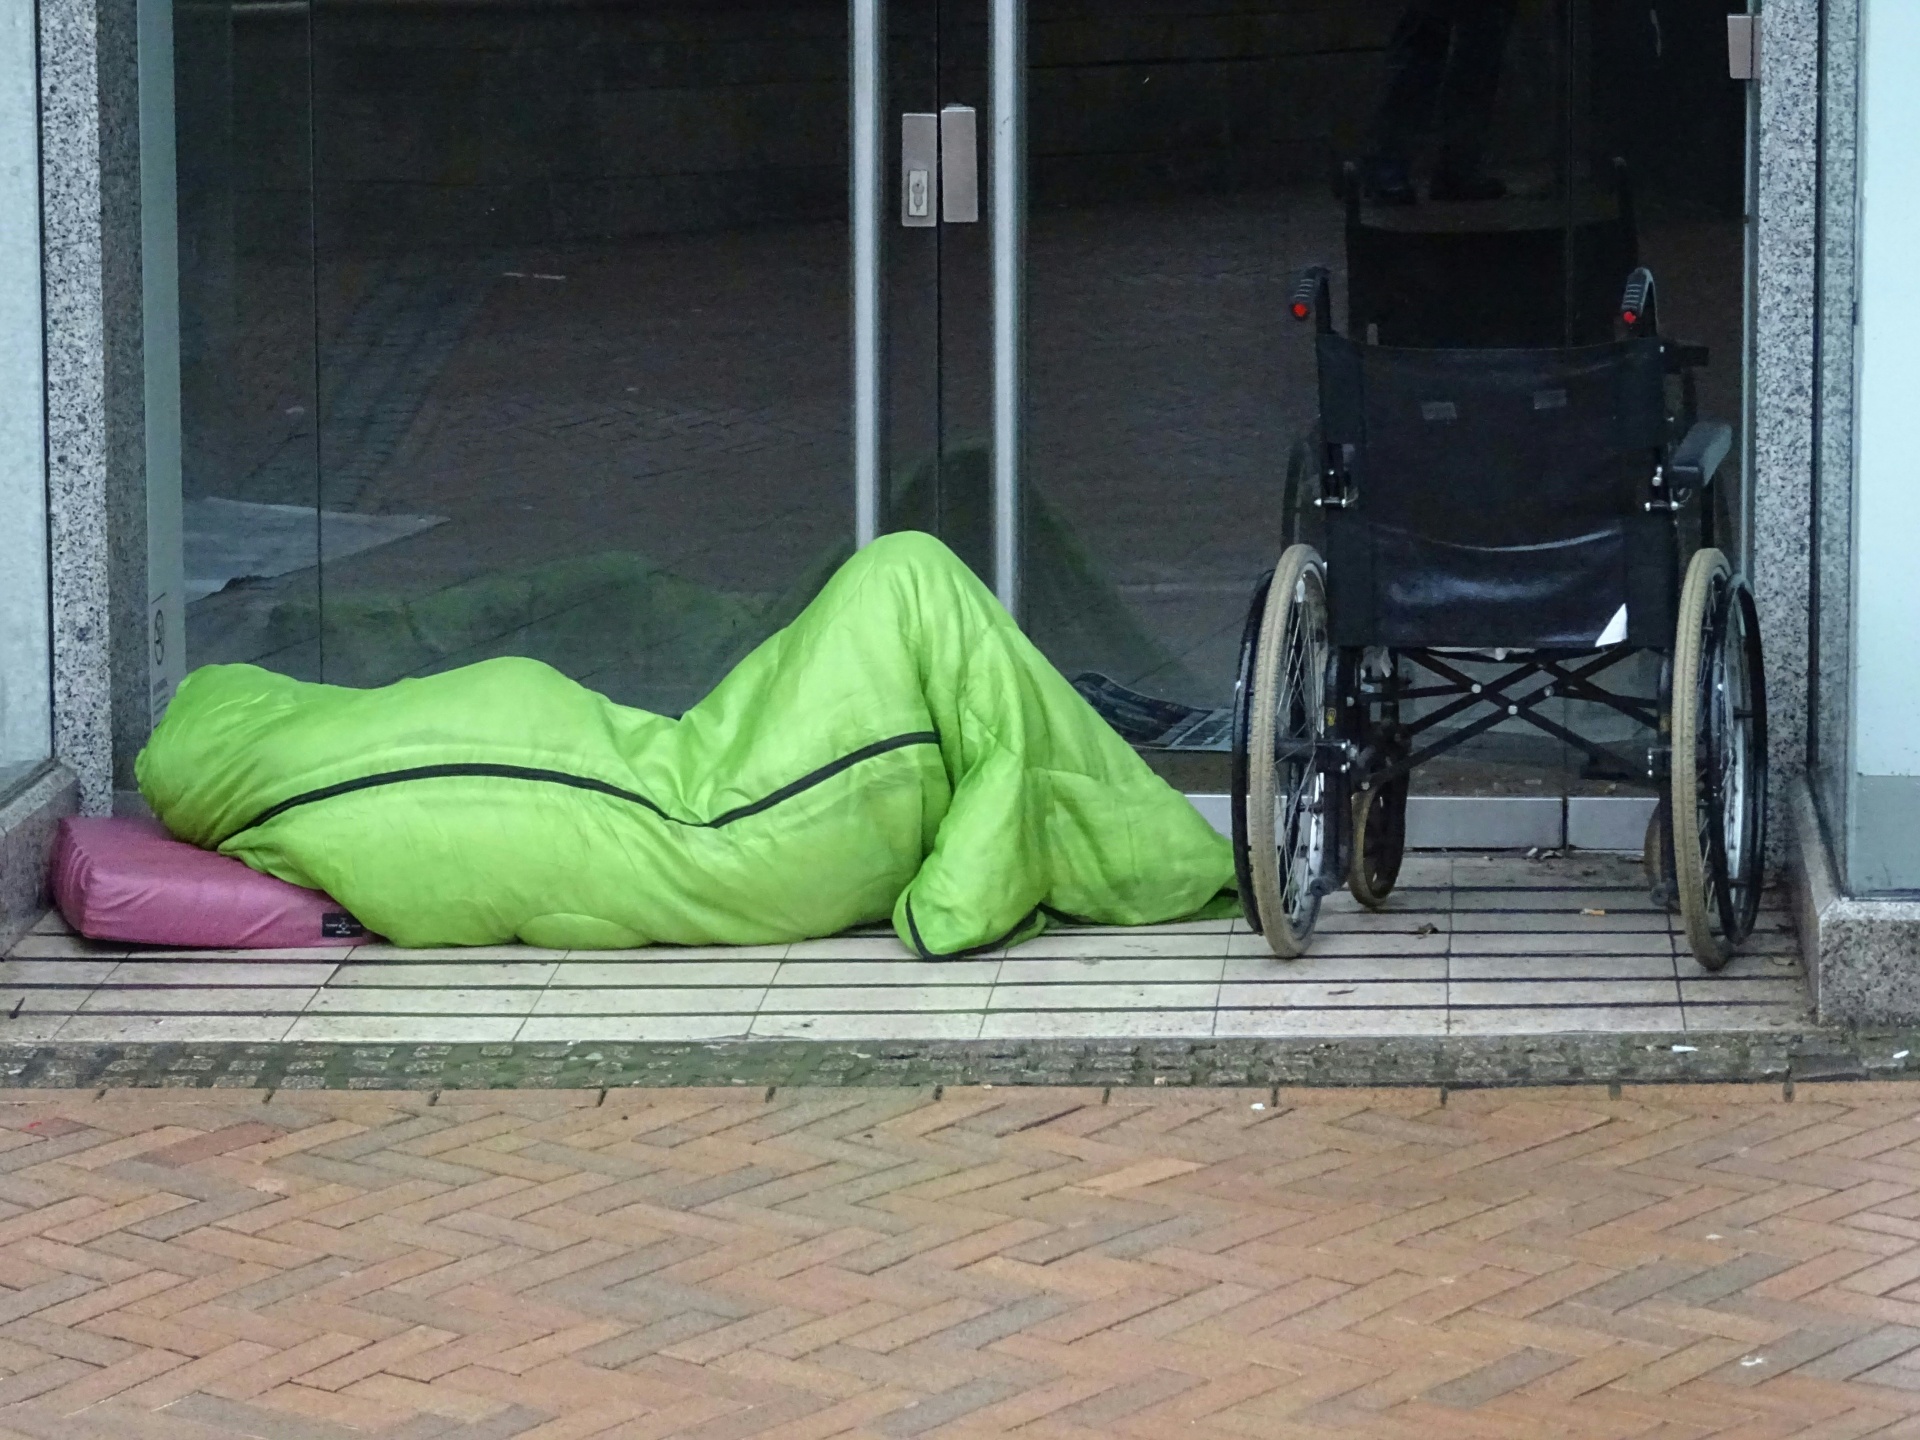 Download free photo of Homeless,hobo,hobos,tramp,tramps - from needpix.com